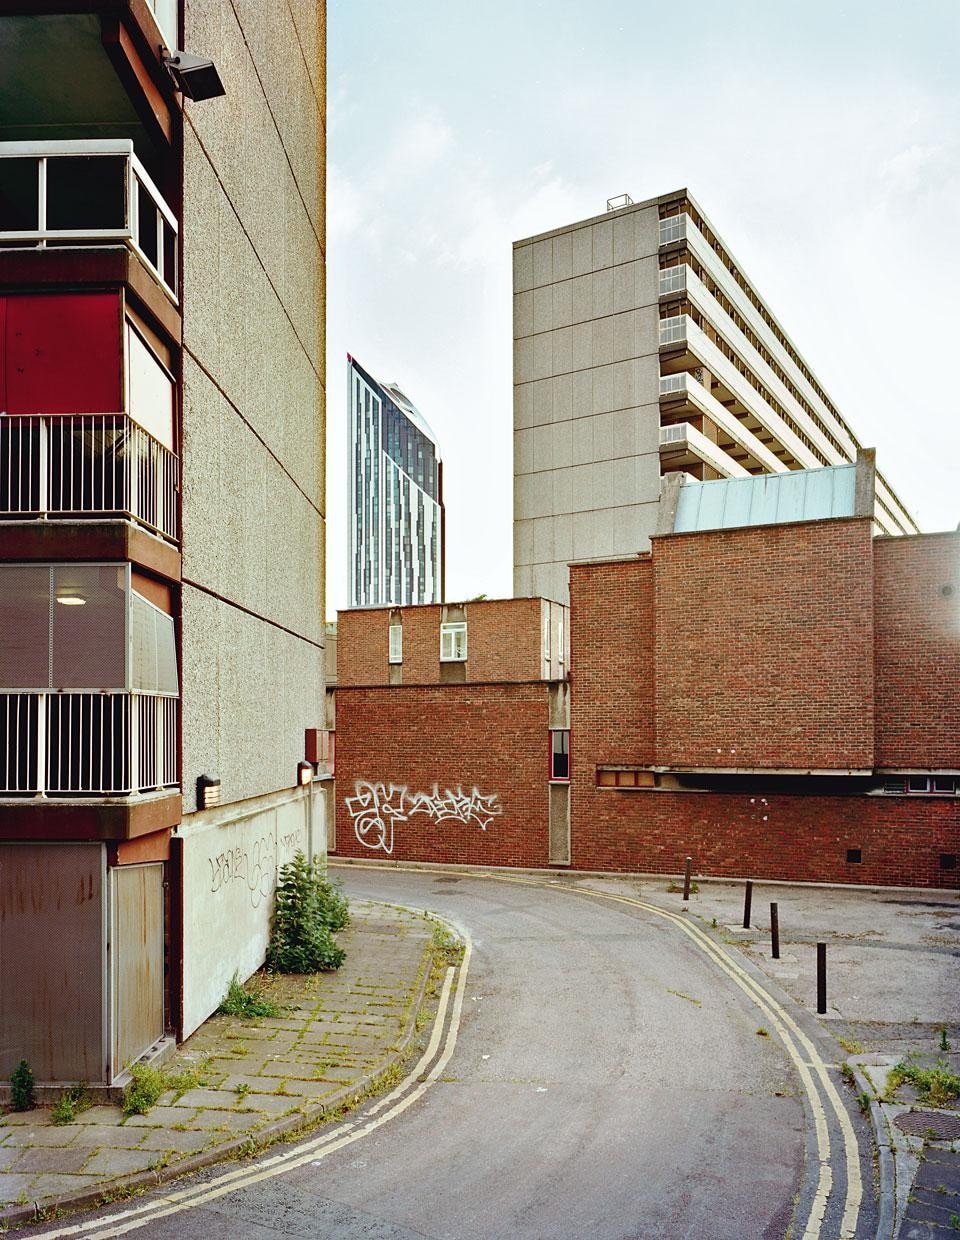 The Heygate Estate
in Elephant and Castle,
which is boarded up and
awaiting demolition as part
of a massive regeneration